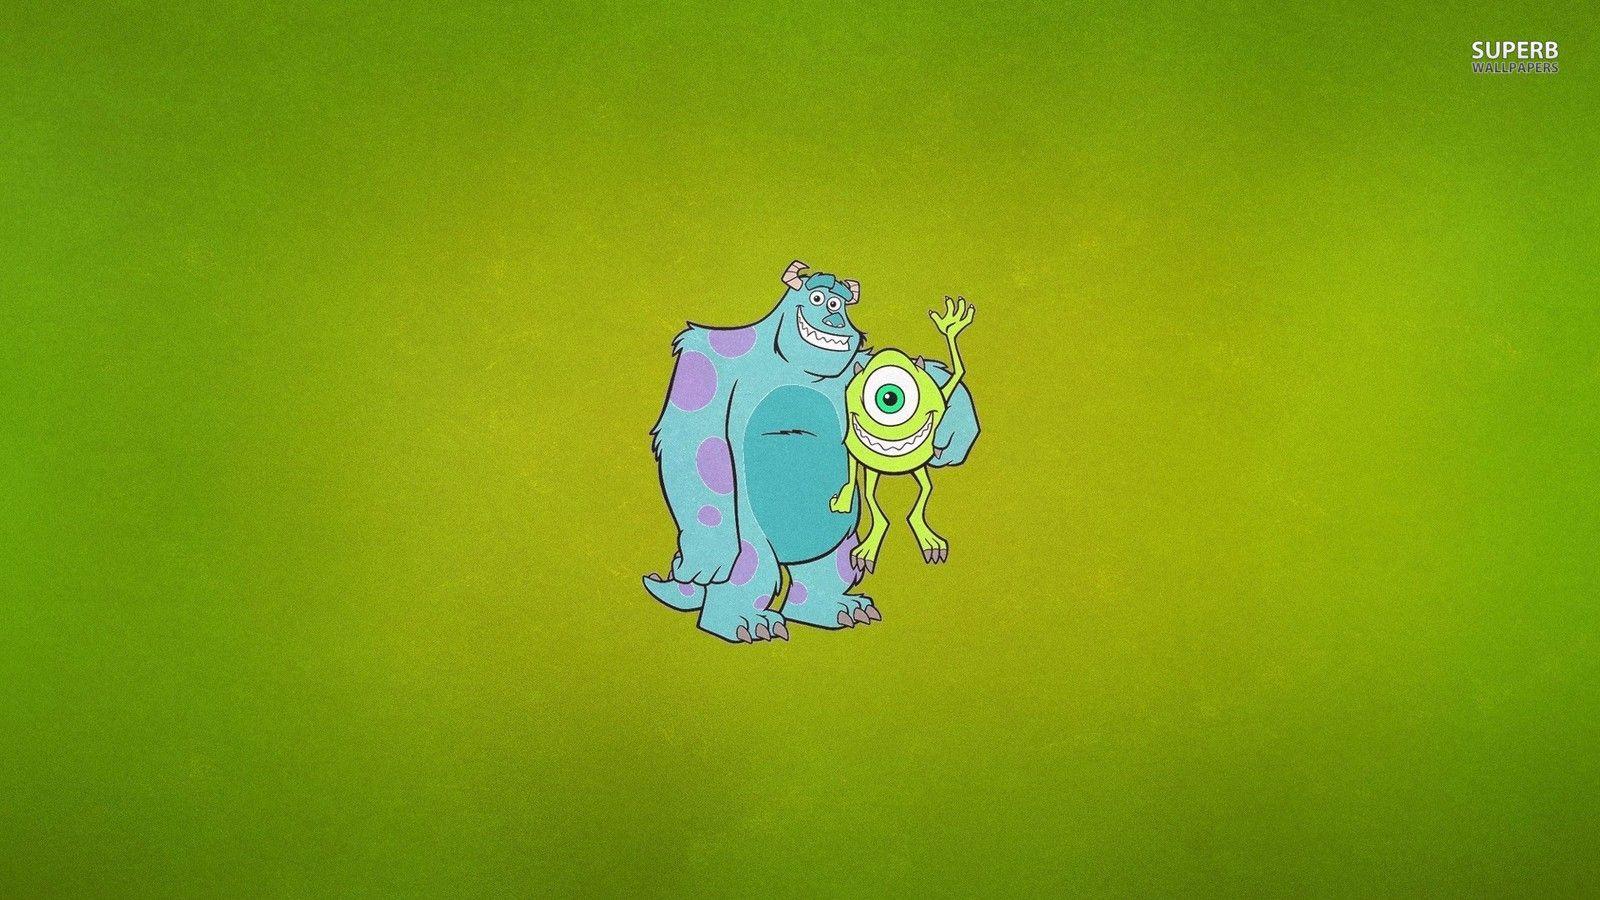 Pixar image Mike and Sulley HD wallpaper and background photo